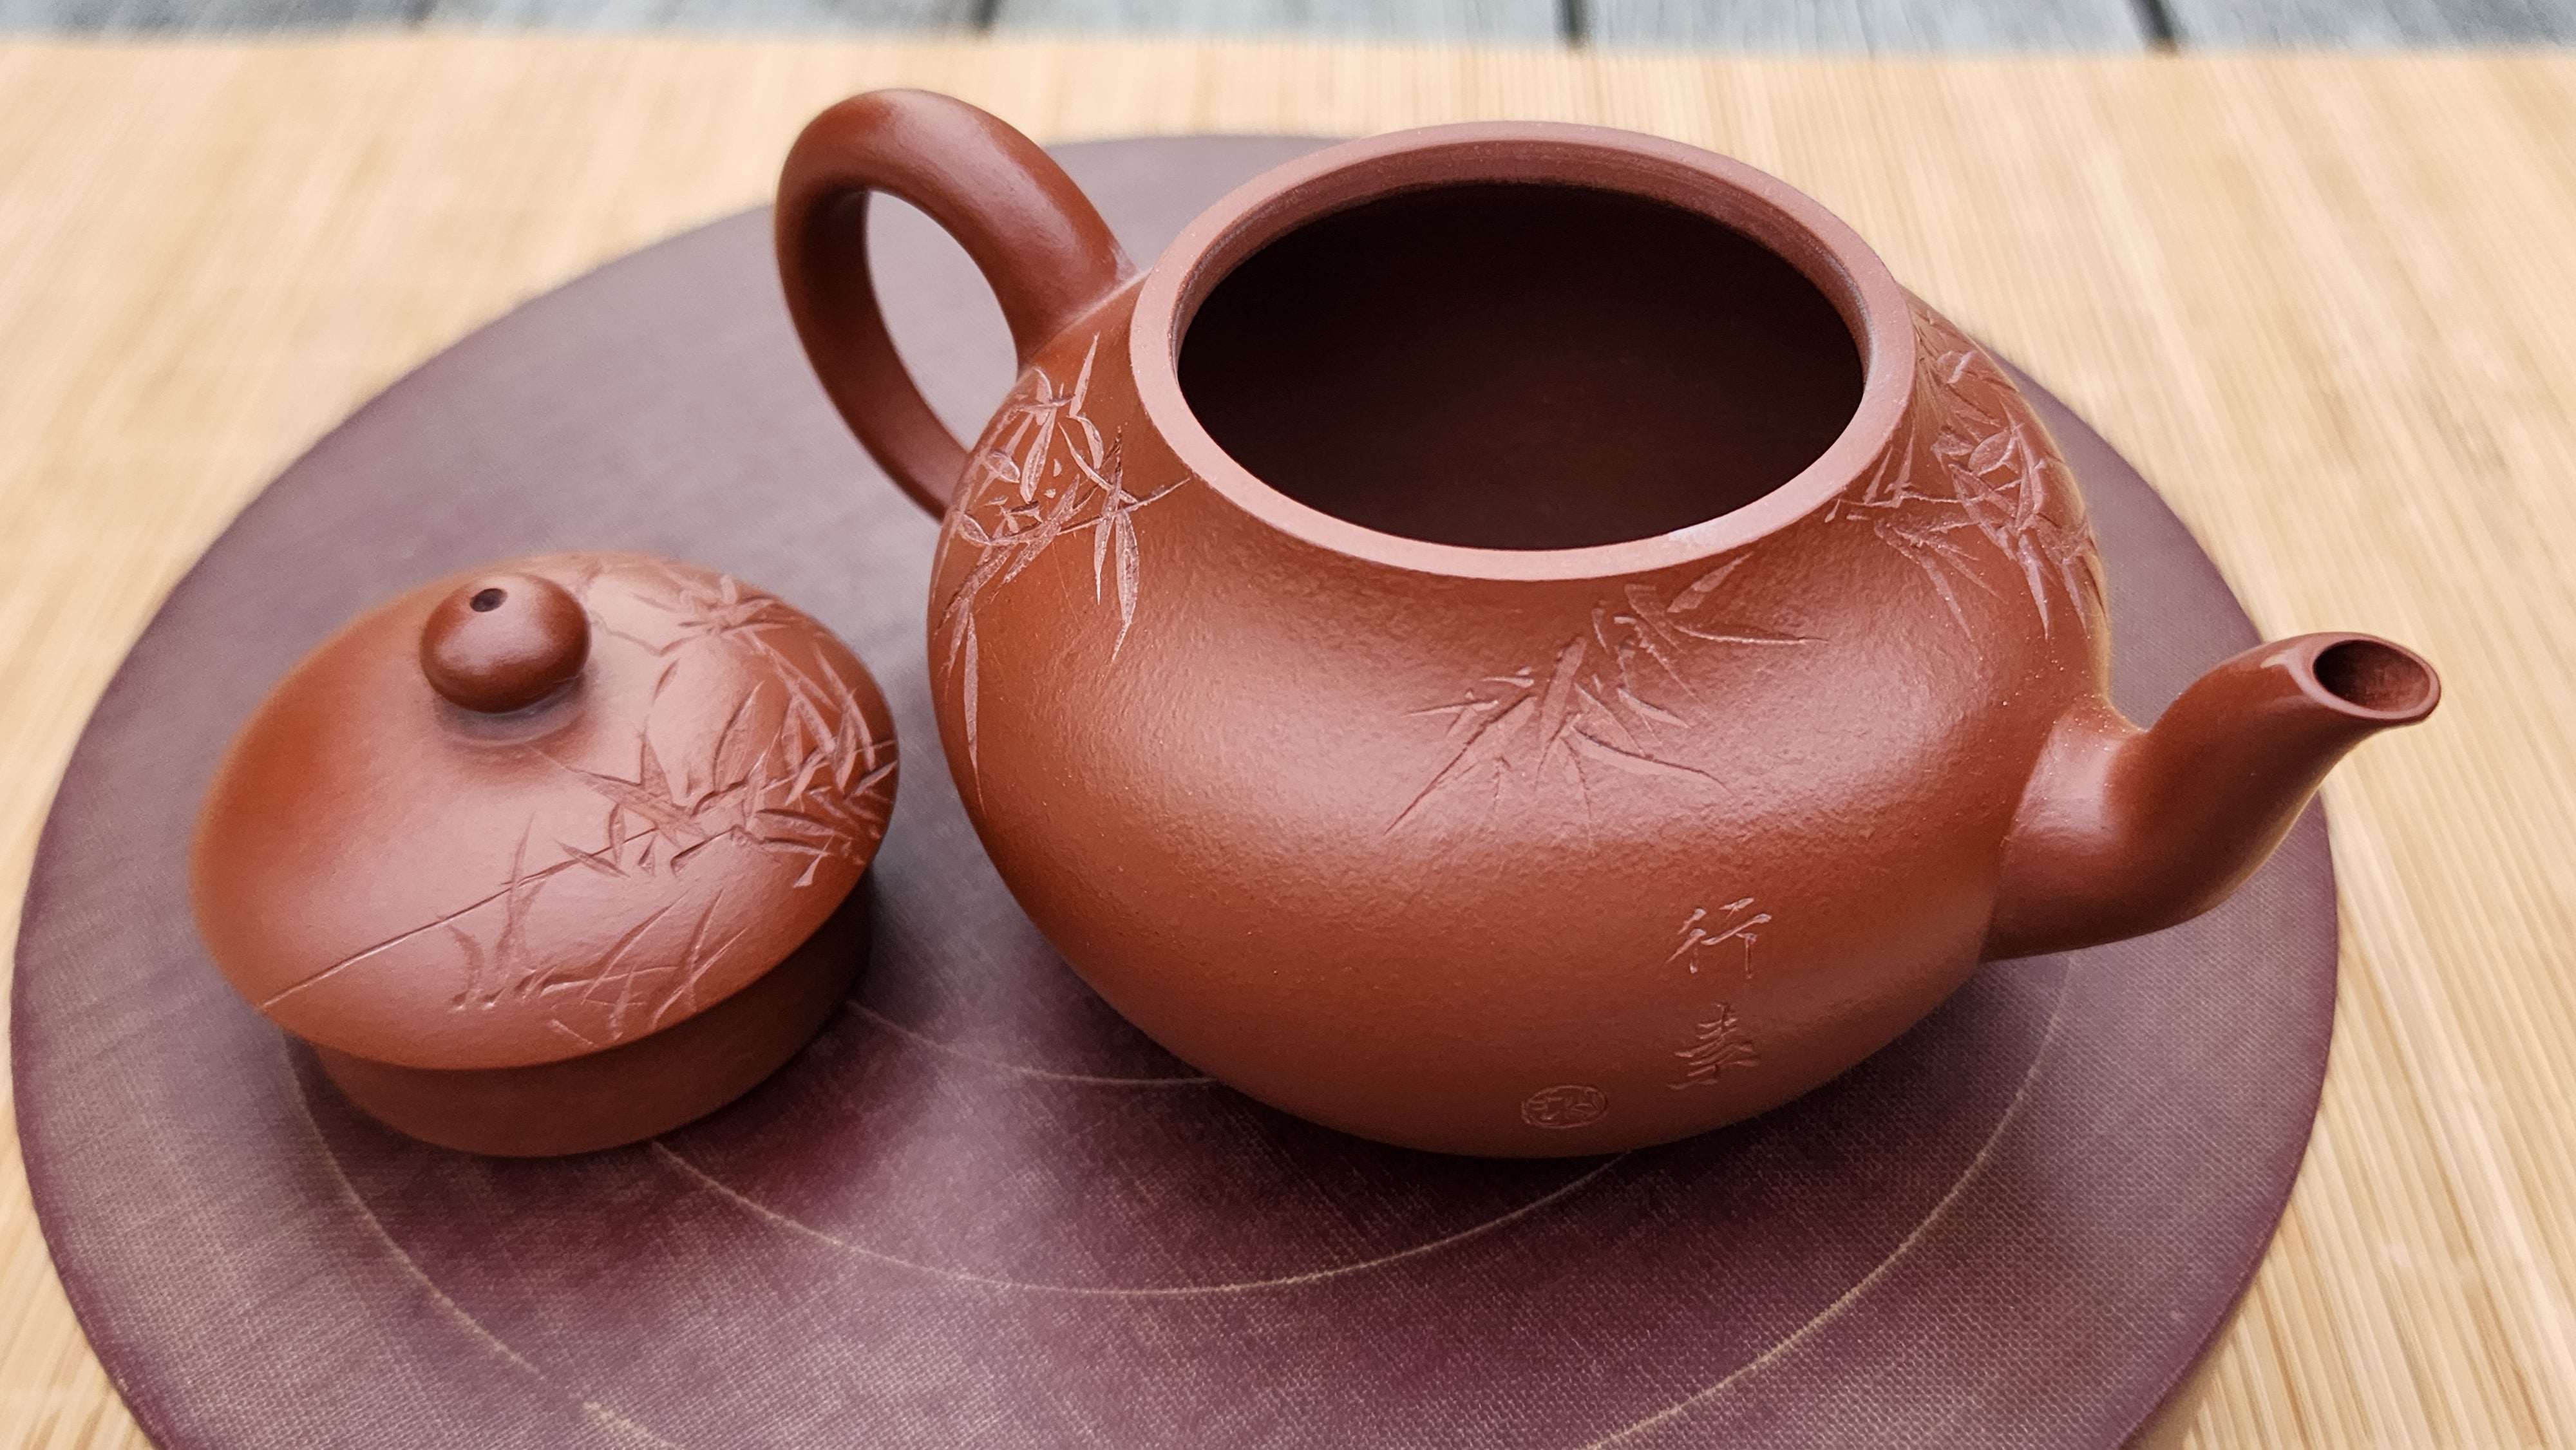 Li Xing 梨形, XiaoMeiYao ZhuNi 小煤窑朱泥, by our collaborative Craftsman Zhao Xiao Wei 赵小卫。Bamboo engraving and Calligraphy inscription by L4 Assoc Master Artist Xing Su 行素。146ml.